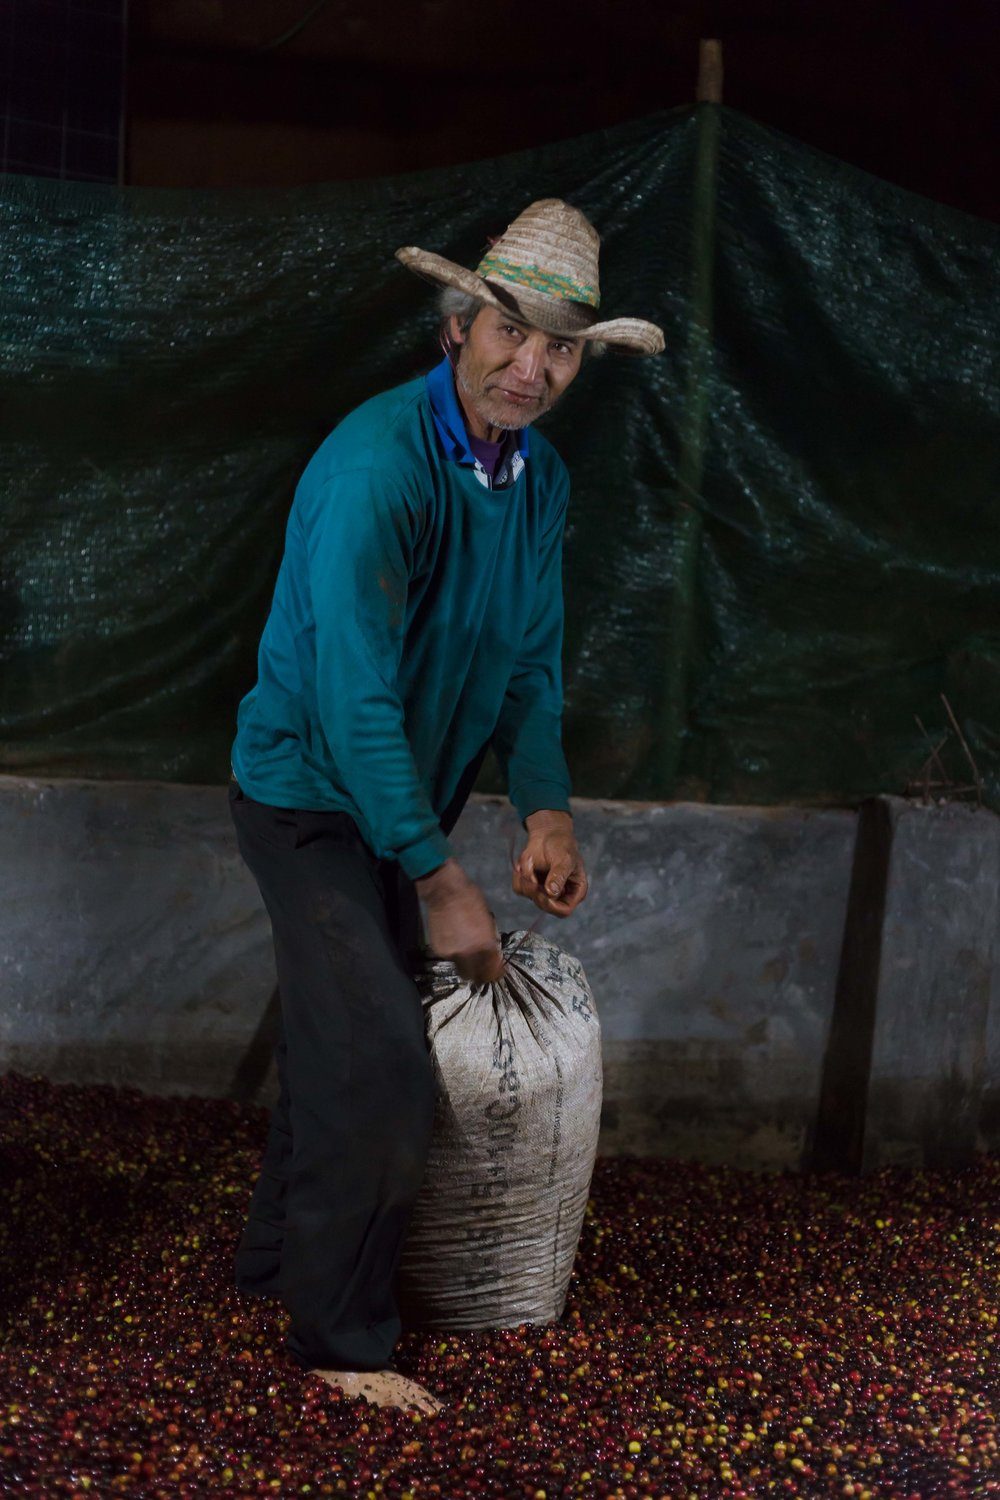 Coffee cherry processing starts in the evening straight after being harvested